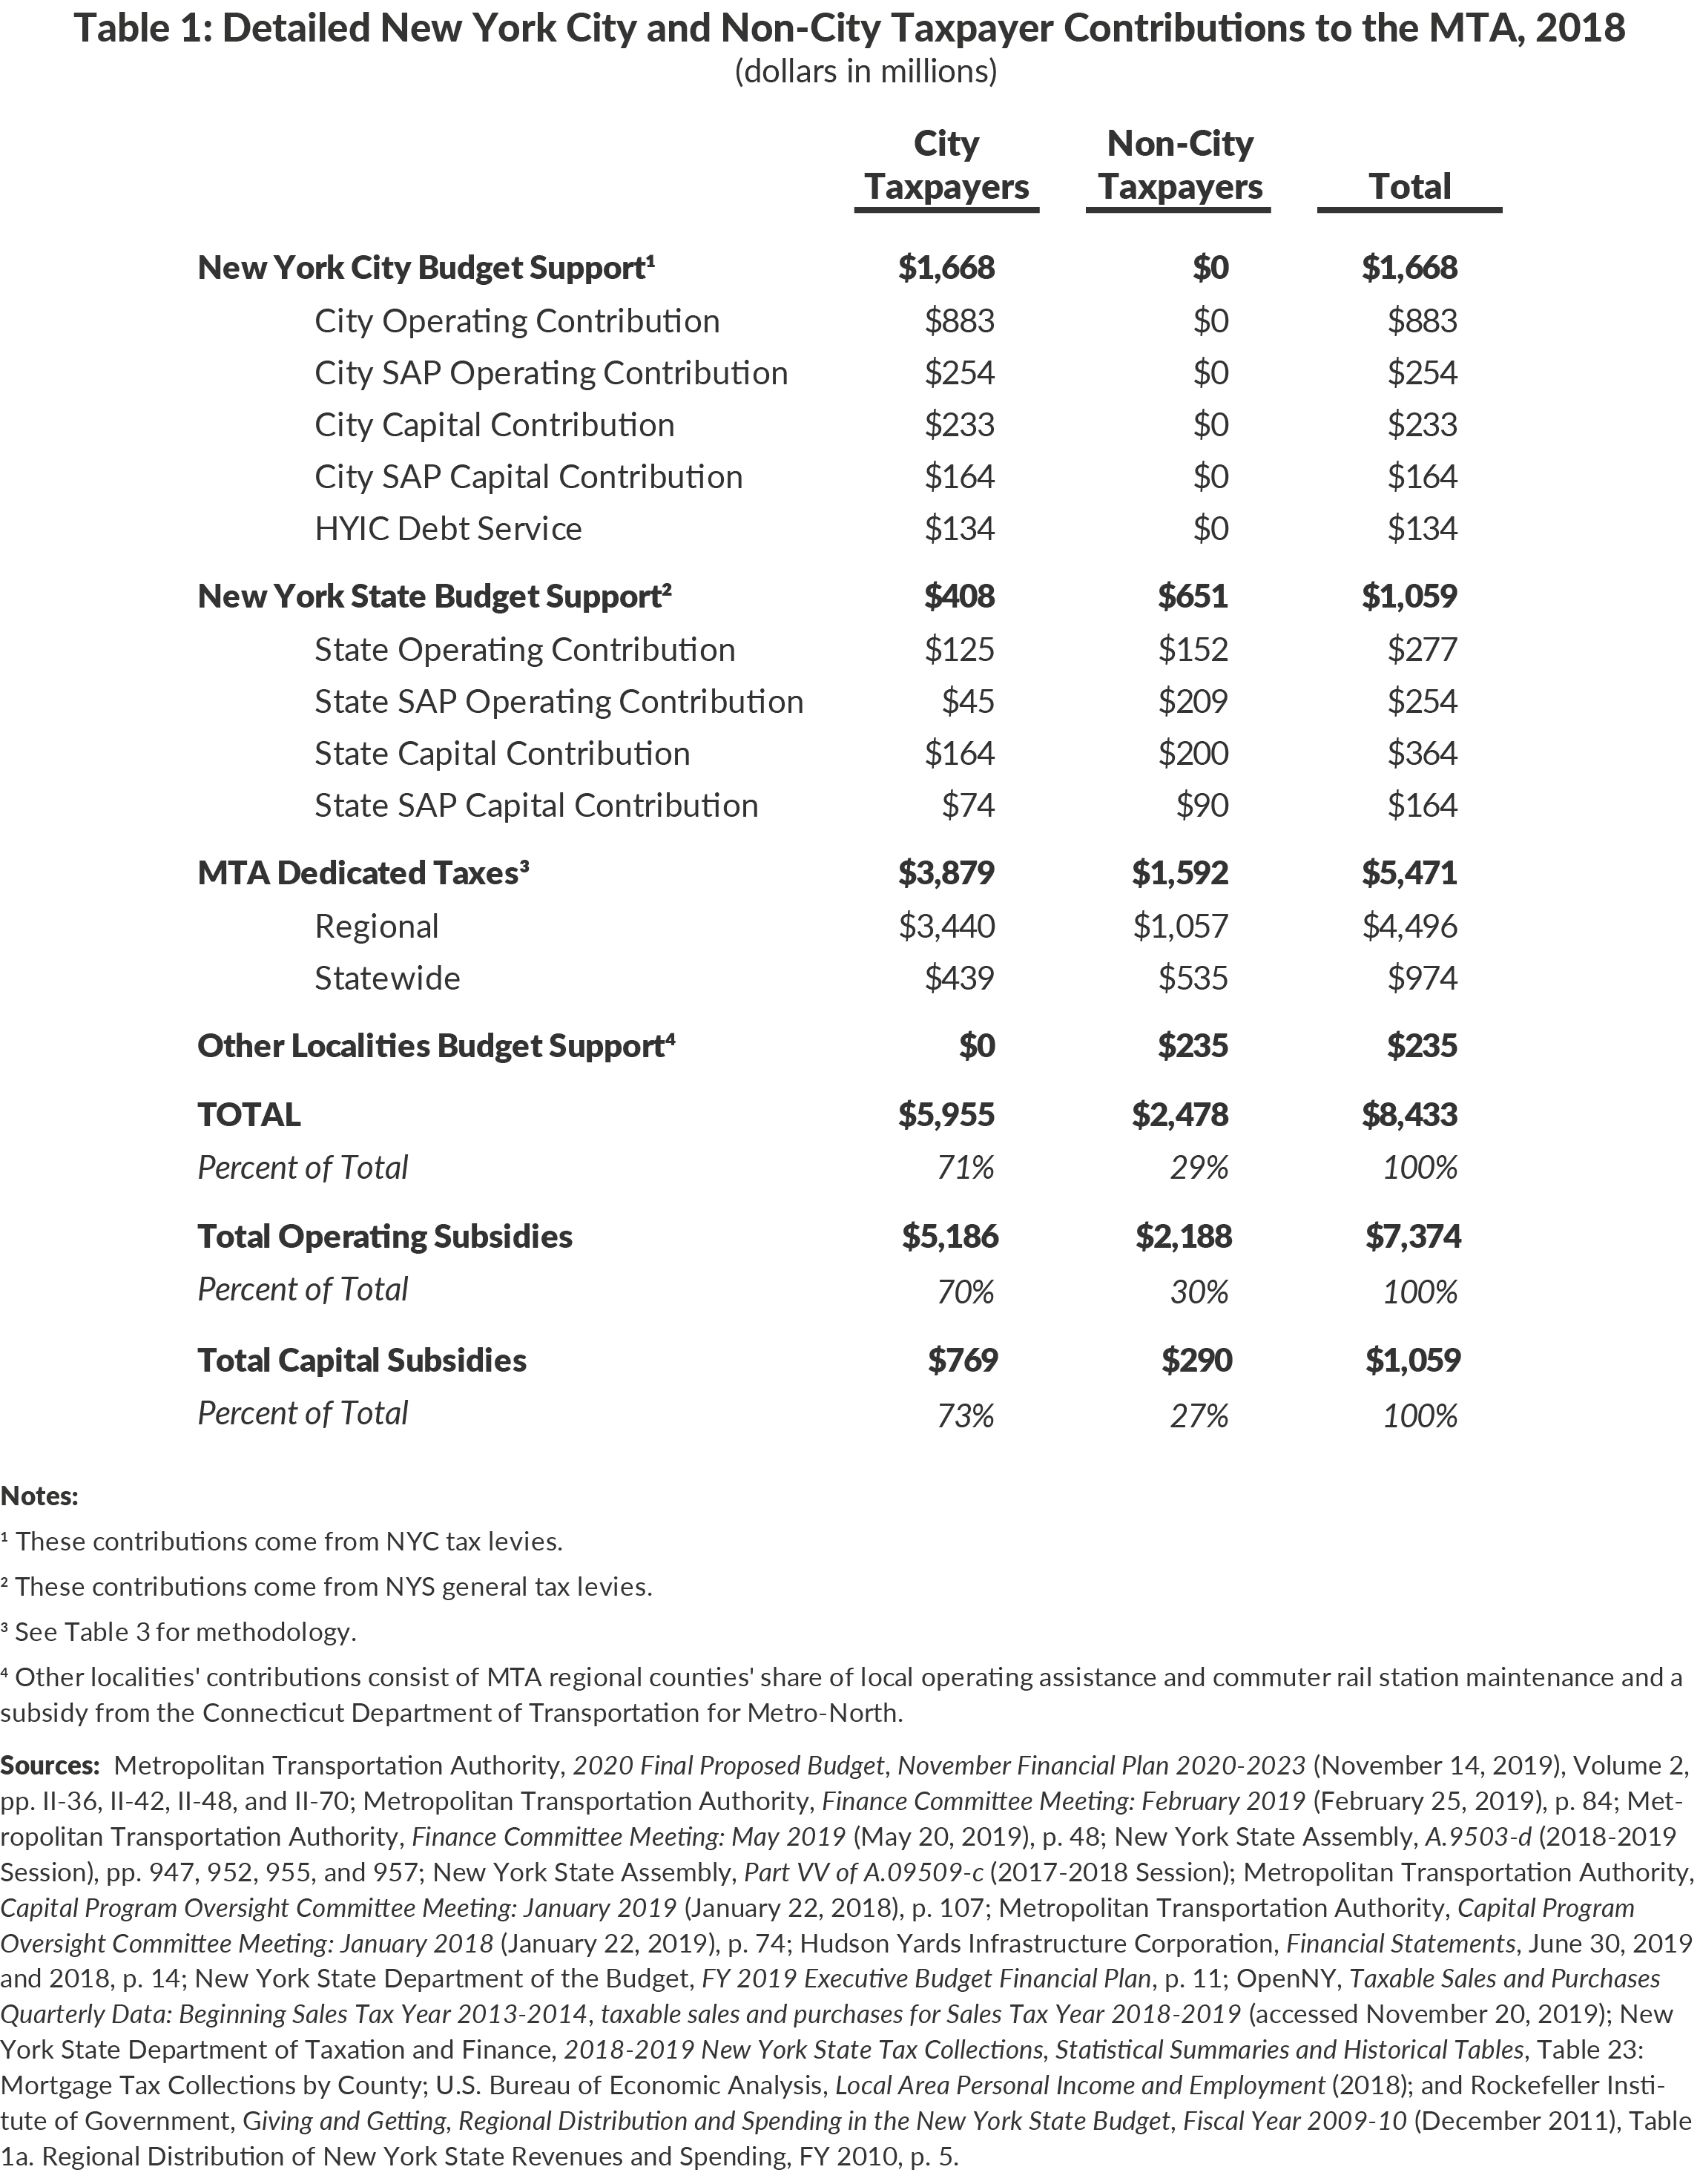 Table 1: Detailed New York City and Non-City Taxpayer Contributions to the MTA, 2018